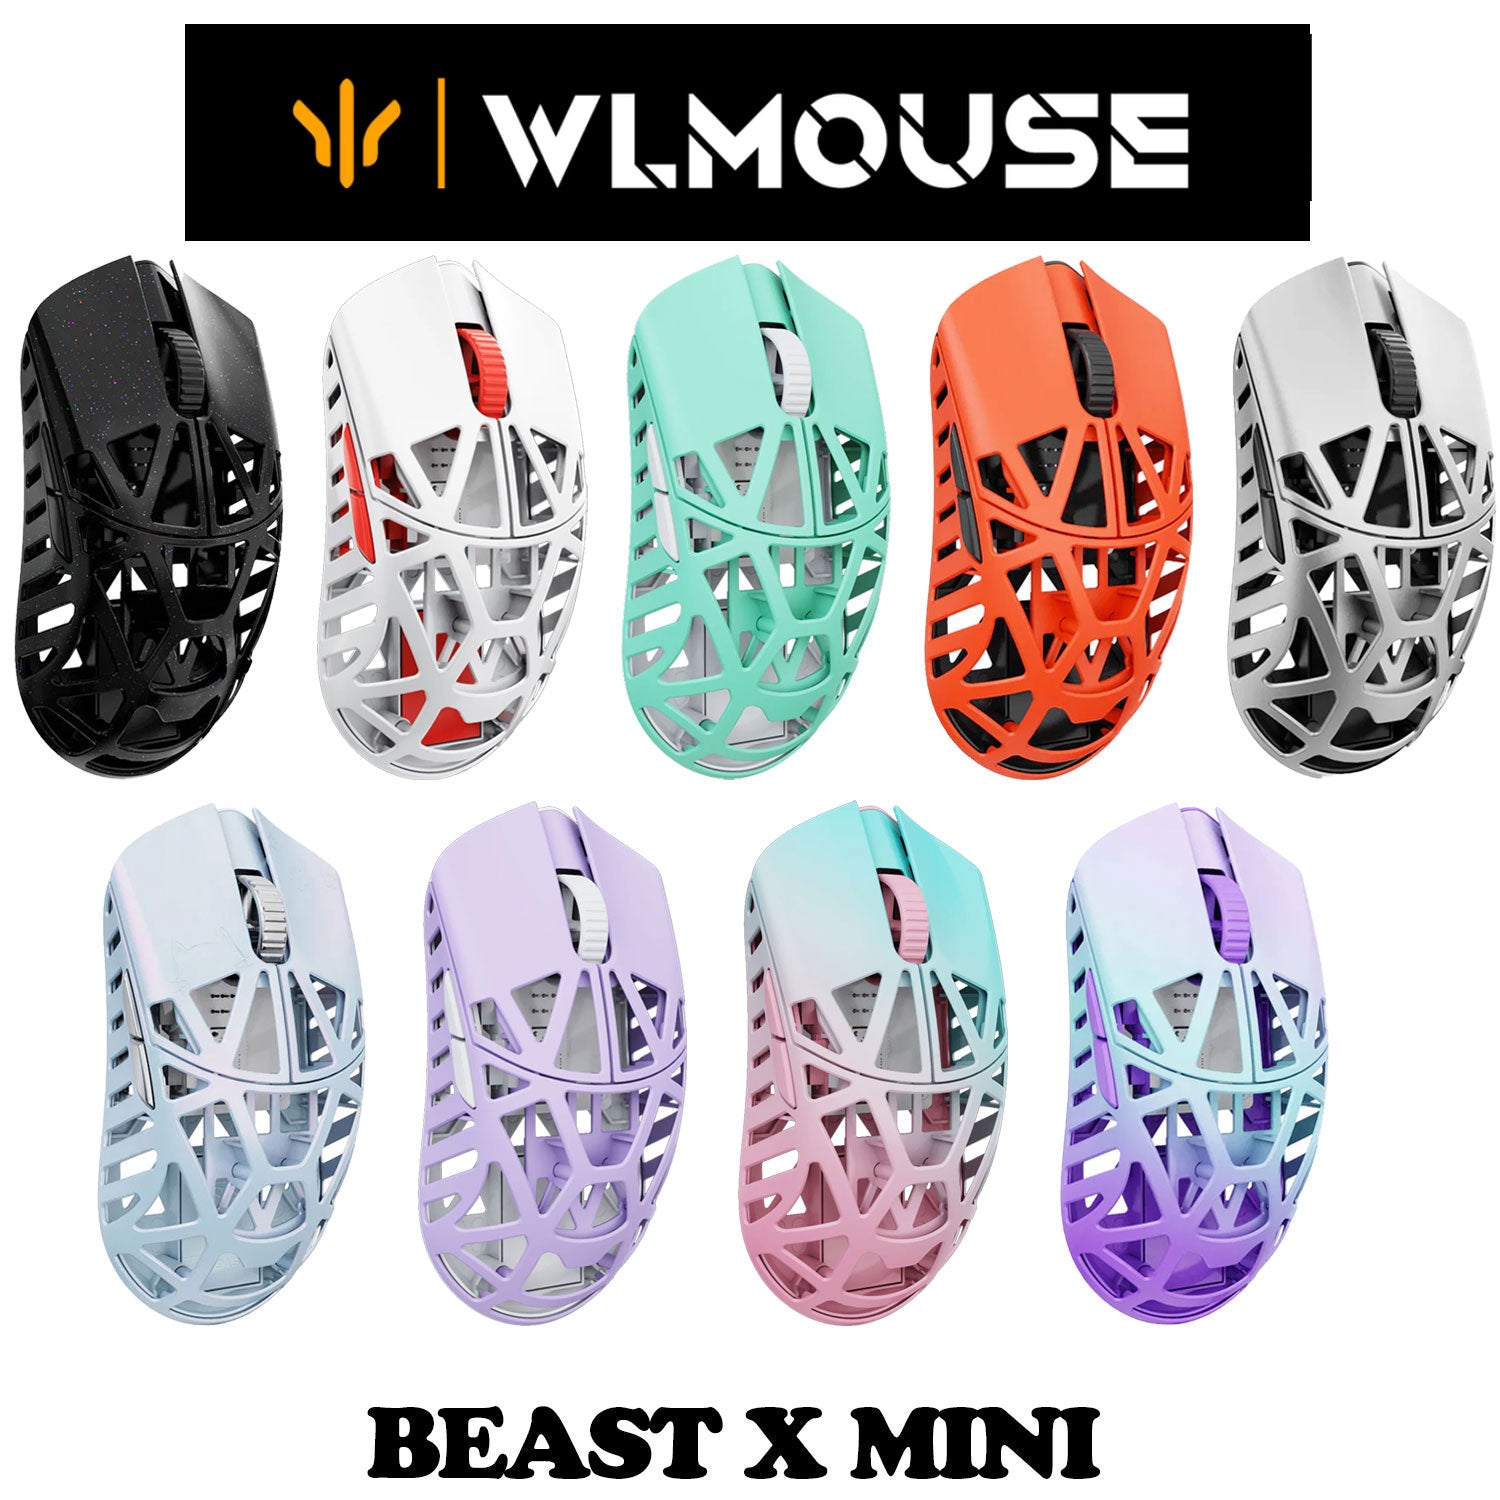 WLMOUSE BEAST X MINI Wireless Gaming Mouse